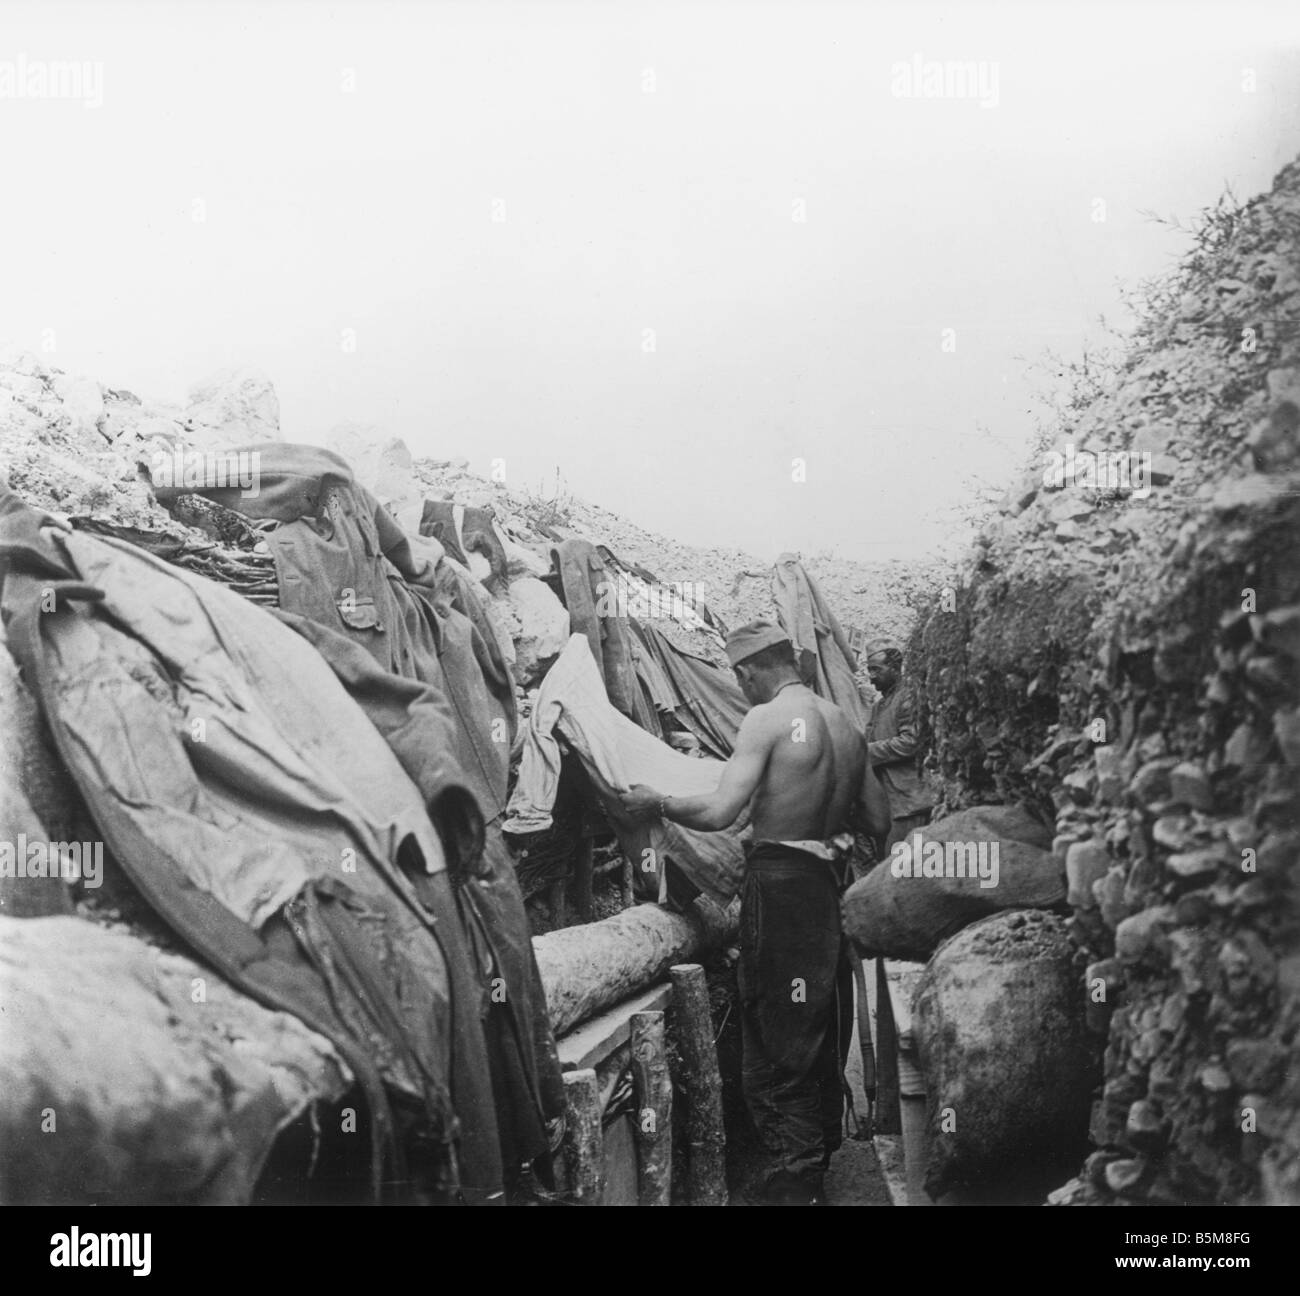 2 G55 F1 1917 19 E Soldier searches for lice WWI History World War One France Trench warfare A French soldier removes lice from Stock Photo